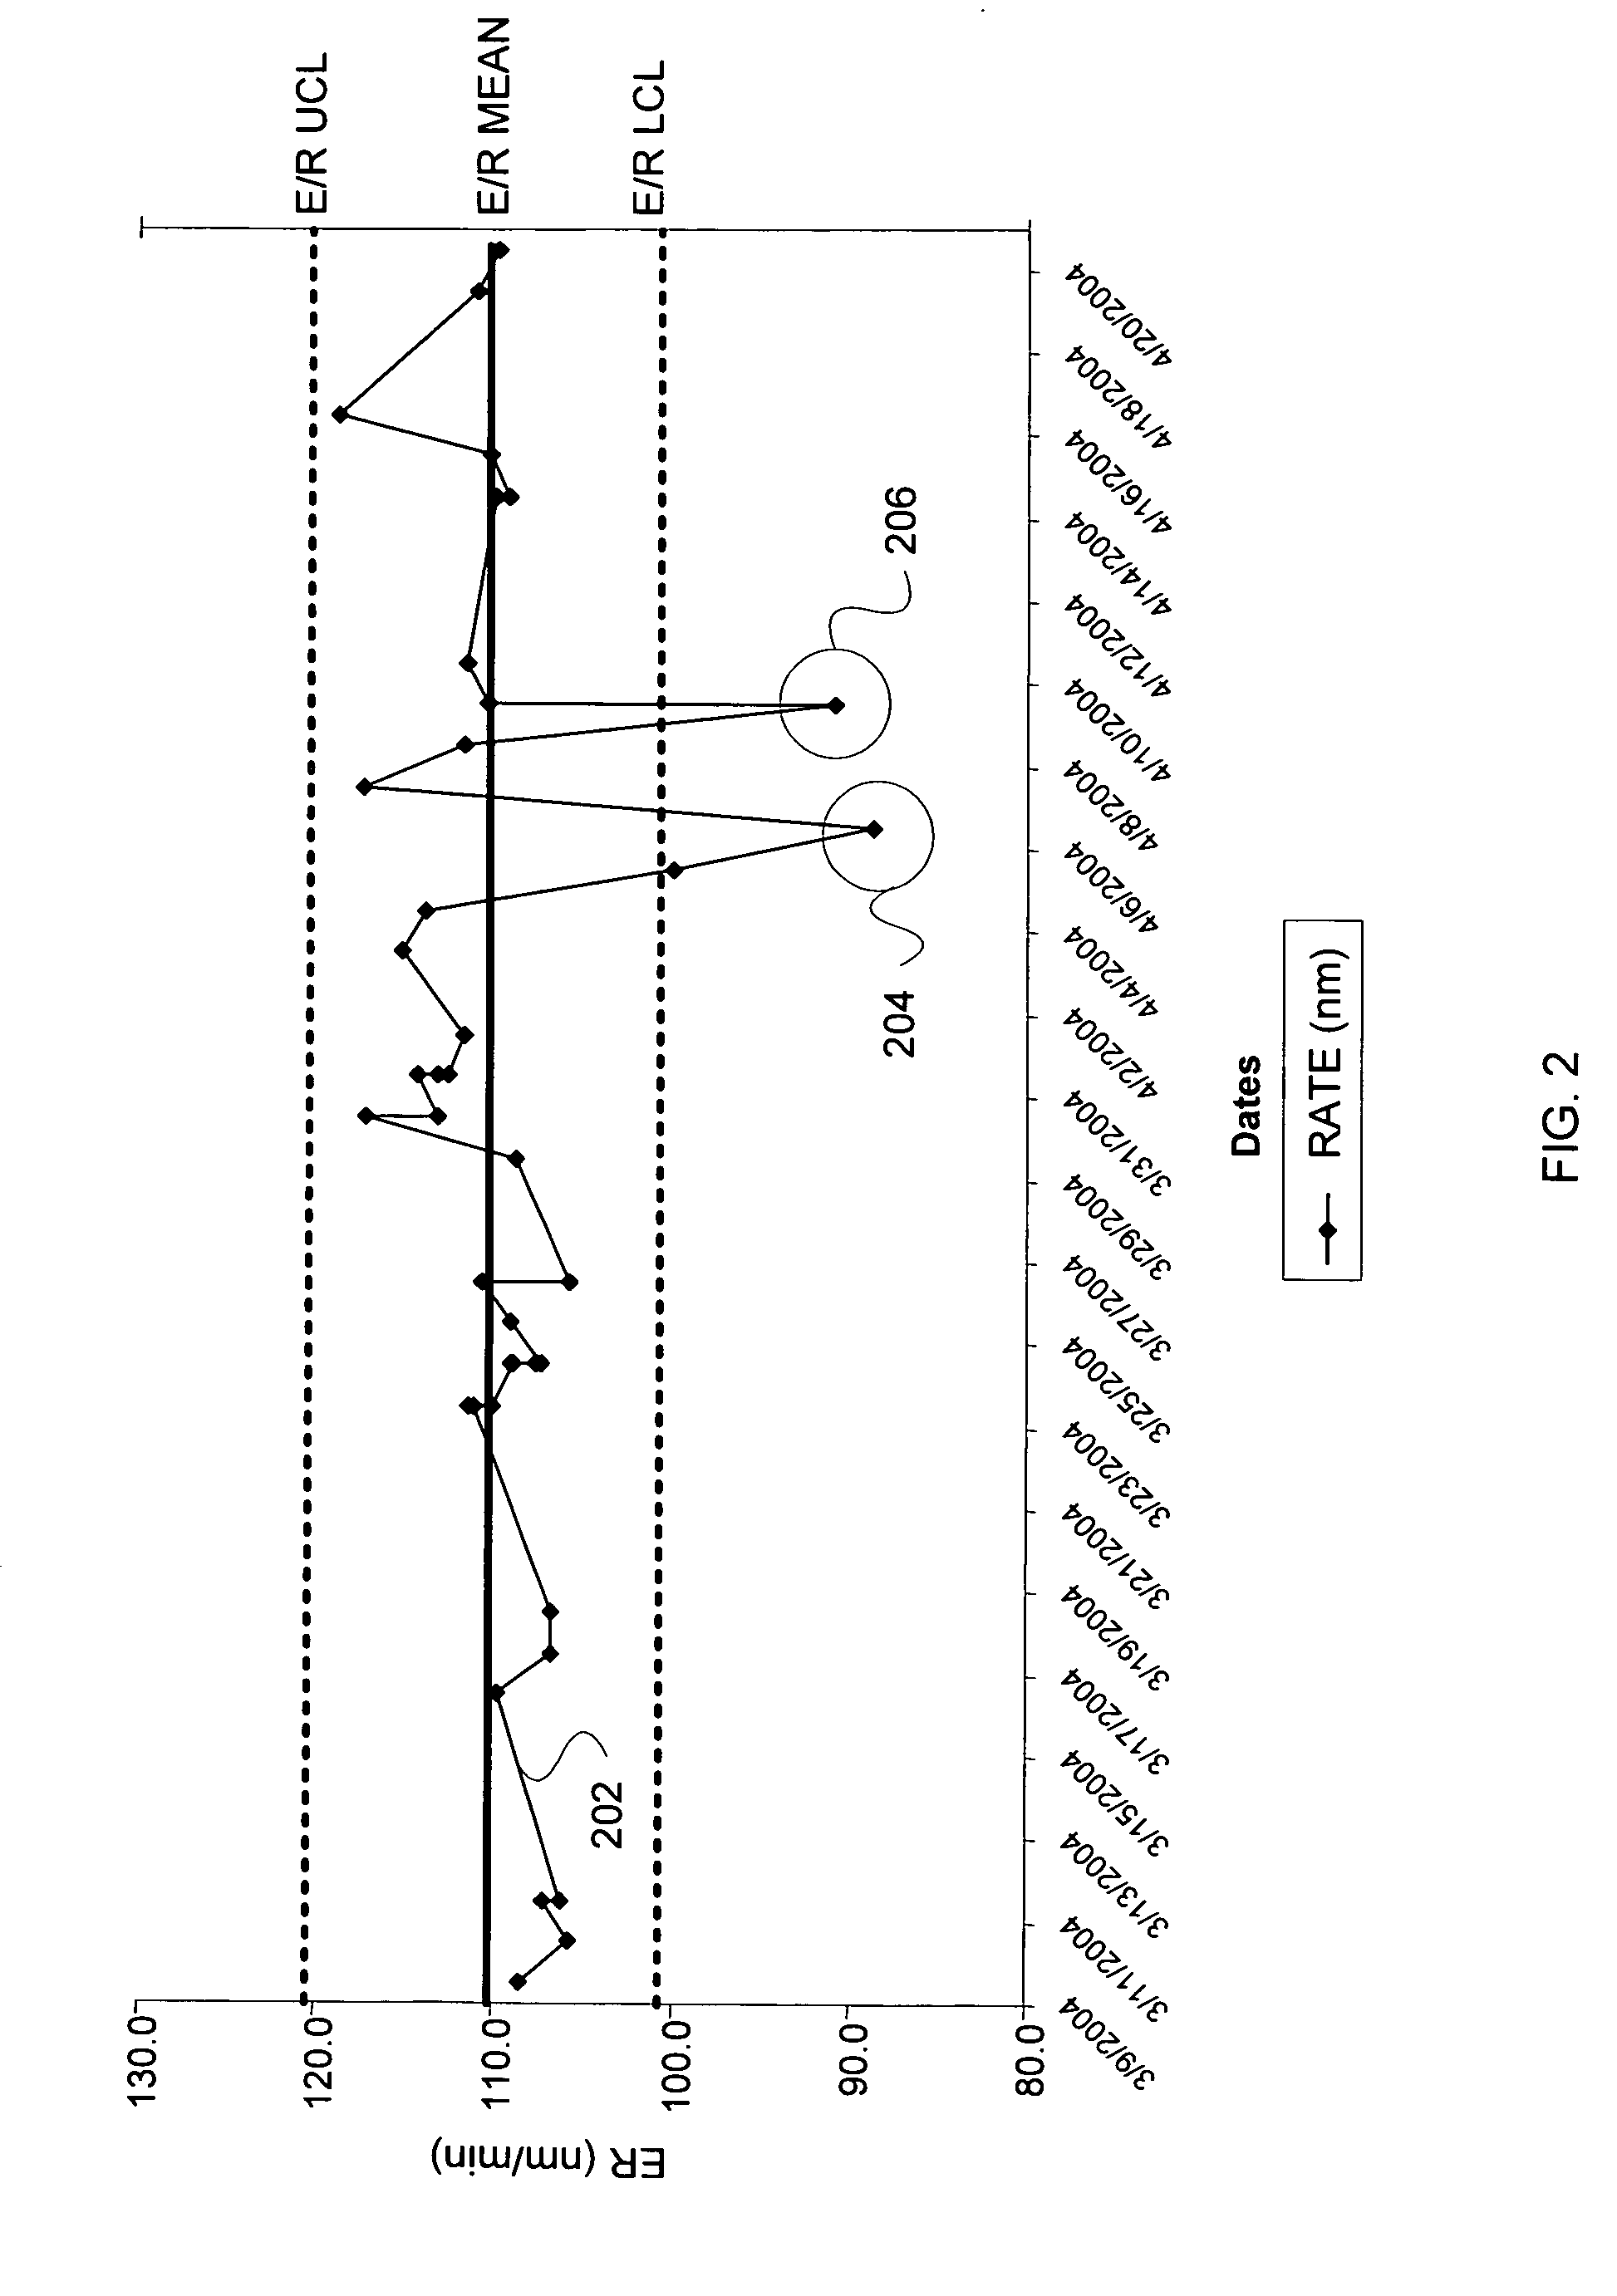 Methods and apparatus for monitoring a process in a plasma processing system by measuring self-bias voltage